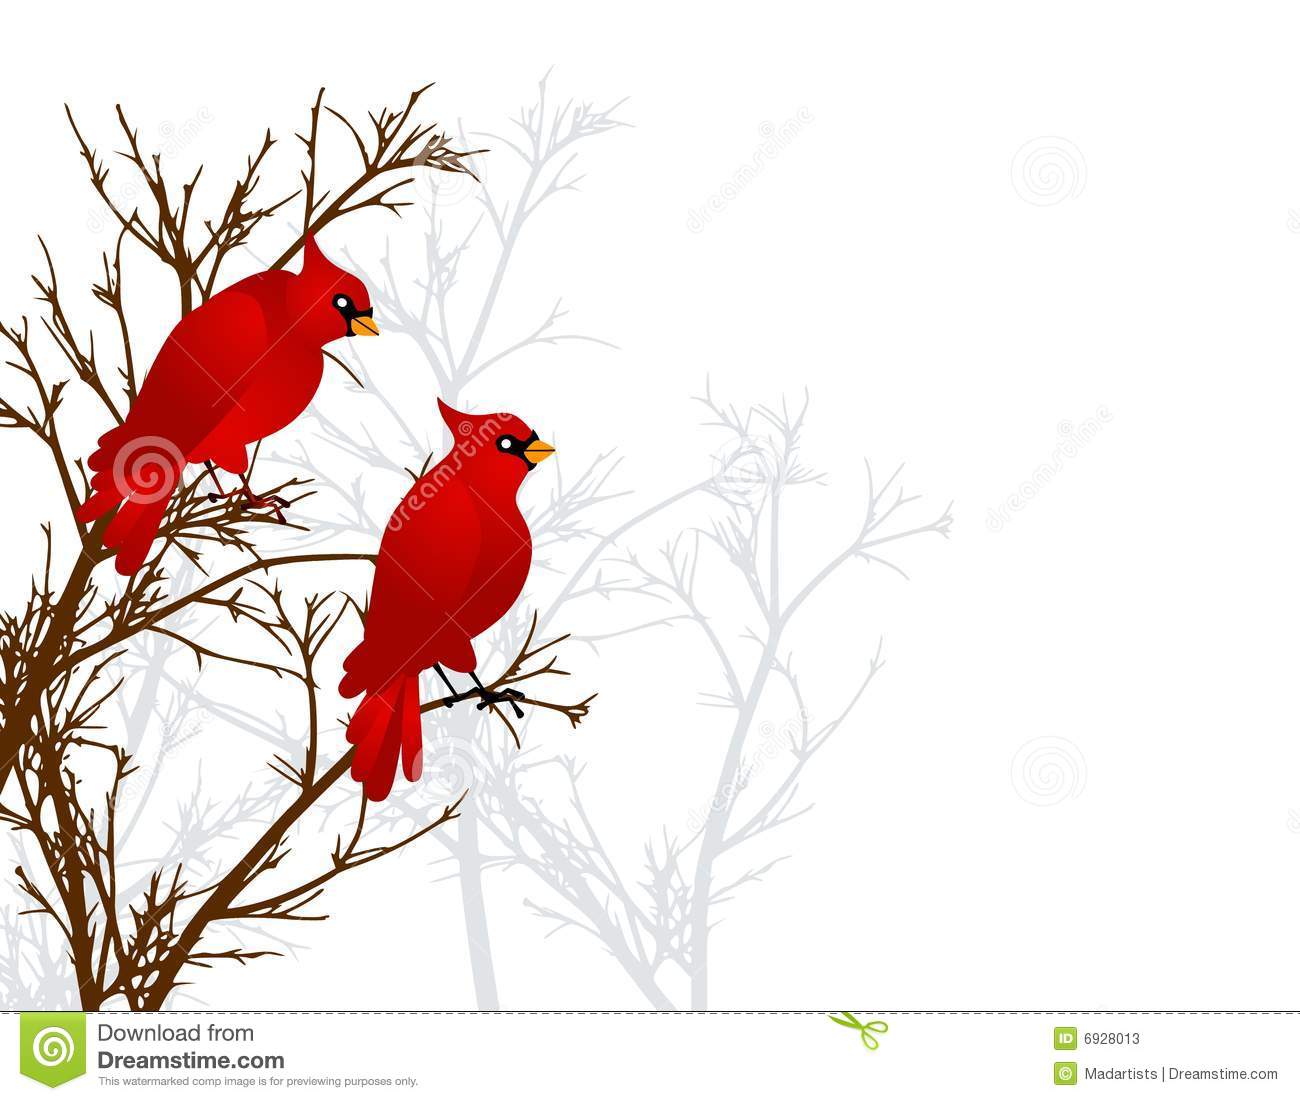 Clip Art Illustration Of 2 Red Cardinal Birds Sitting On A Branch In